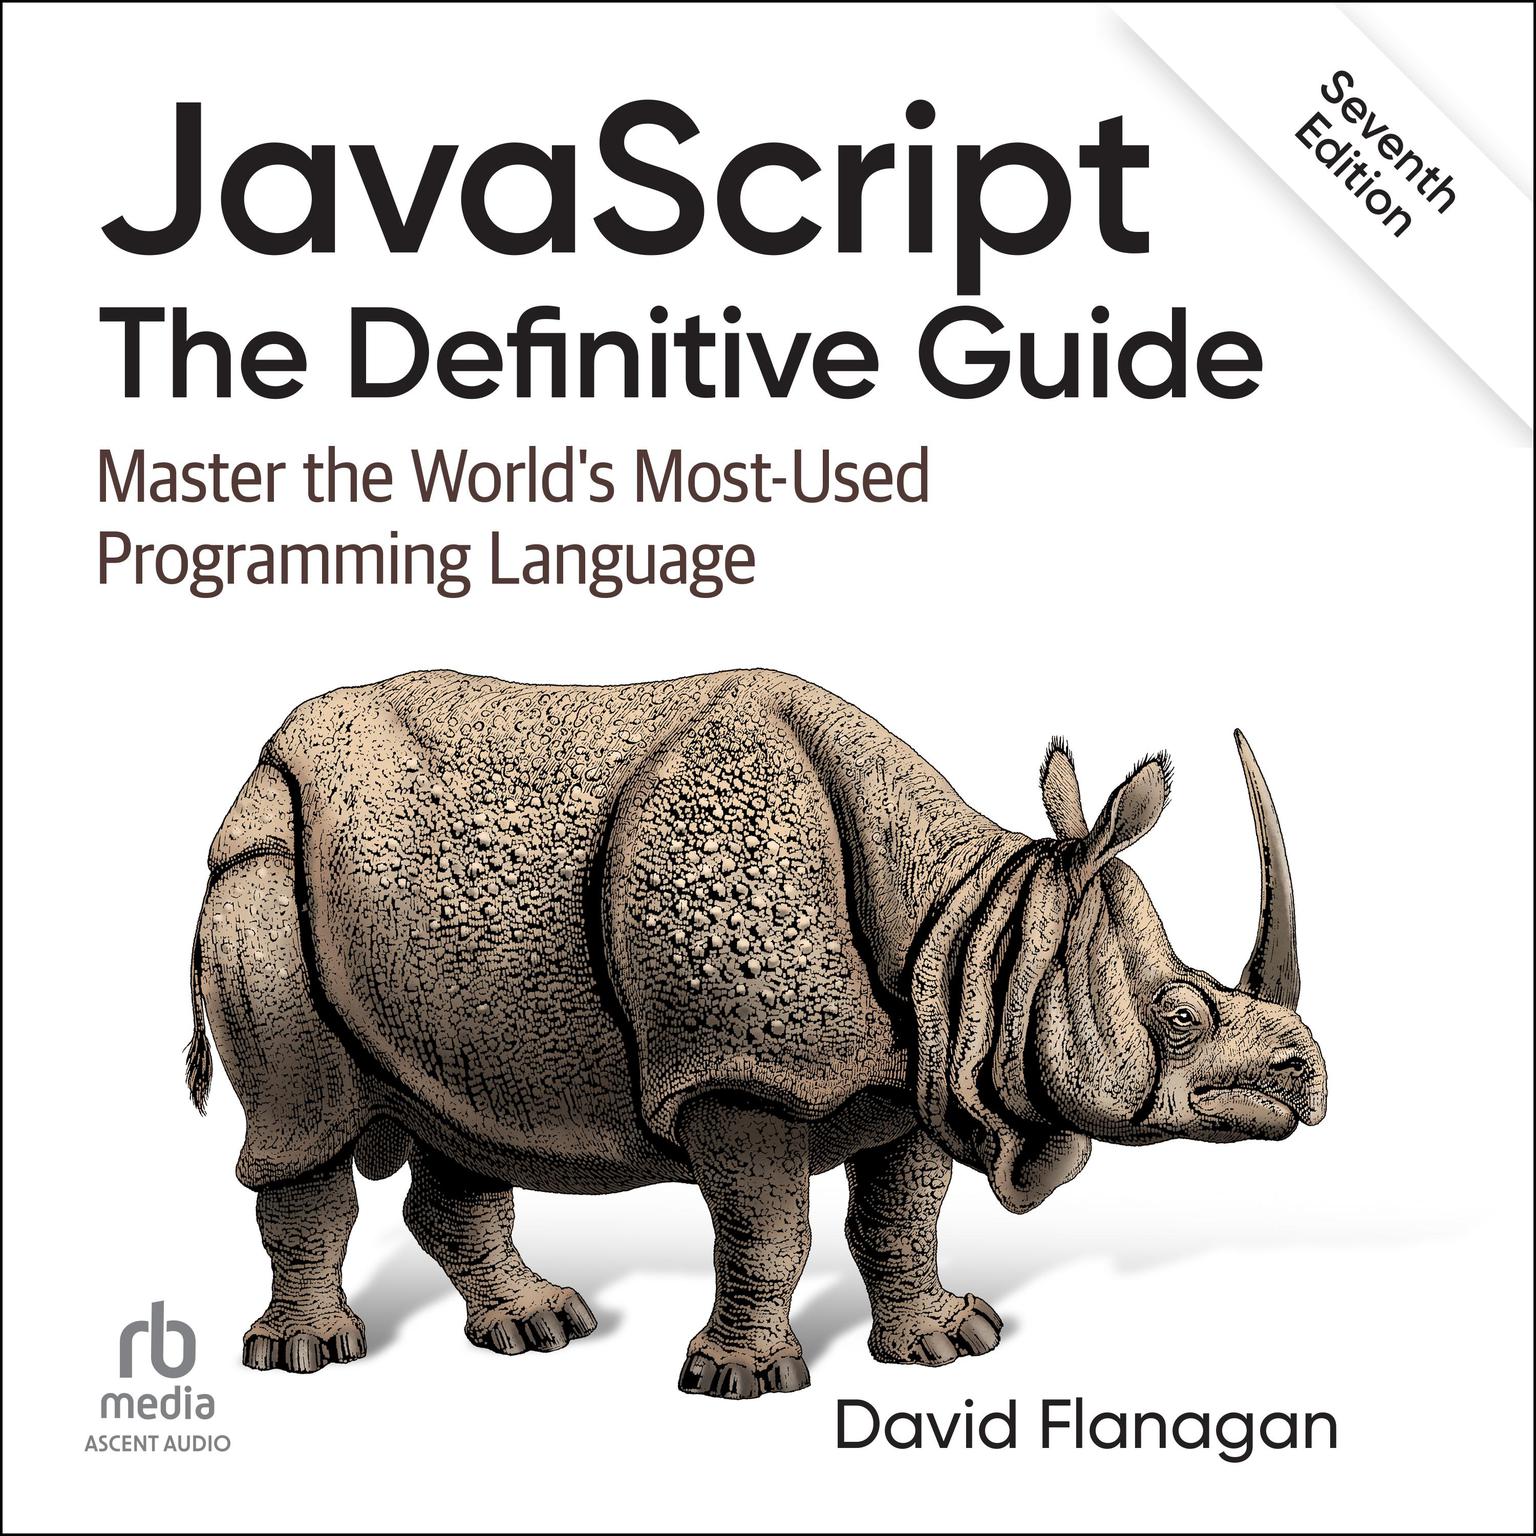 JavaScript: The Definitive Guide: Master the Worlds Most-Used Programming Language, 7th Edition Audiobook, by David Flanagan